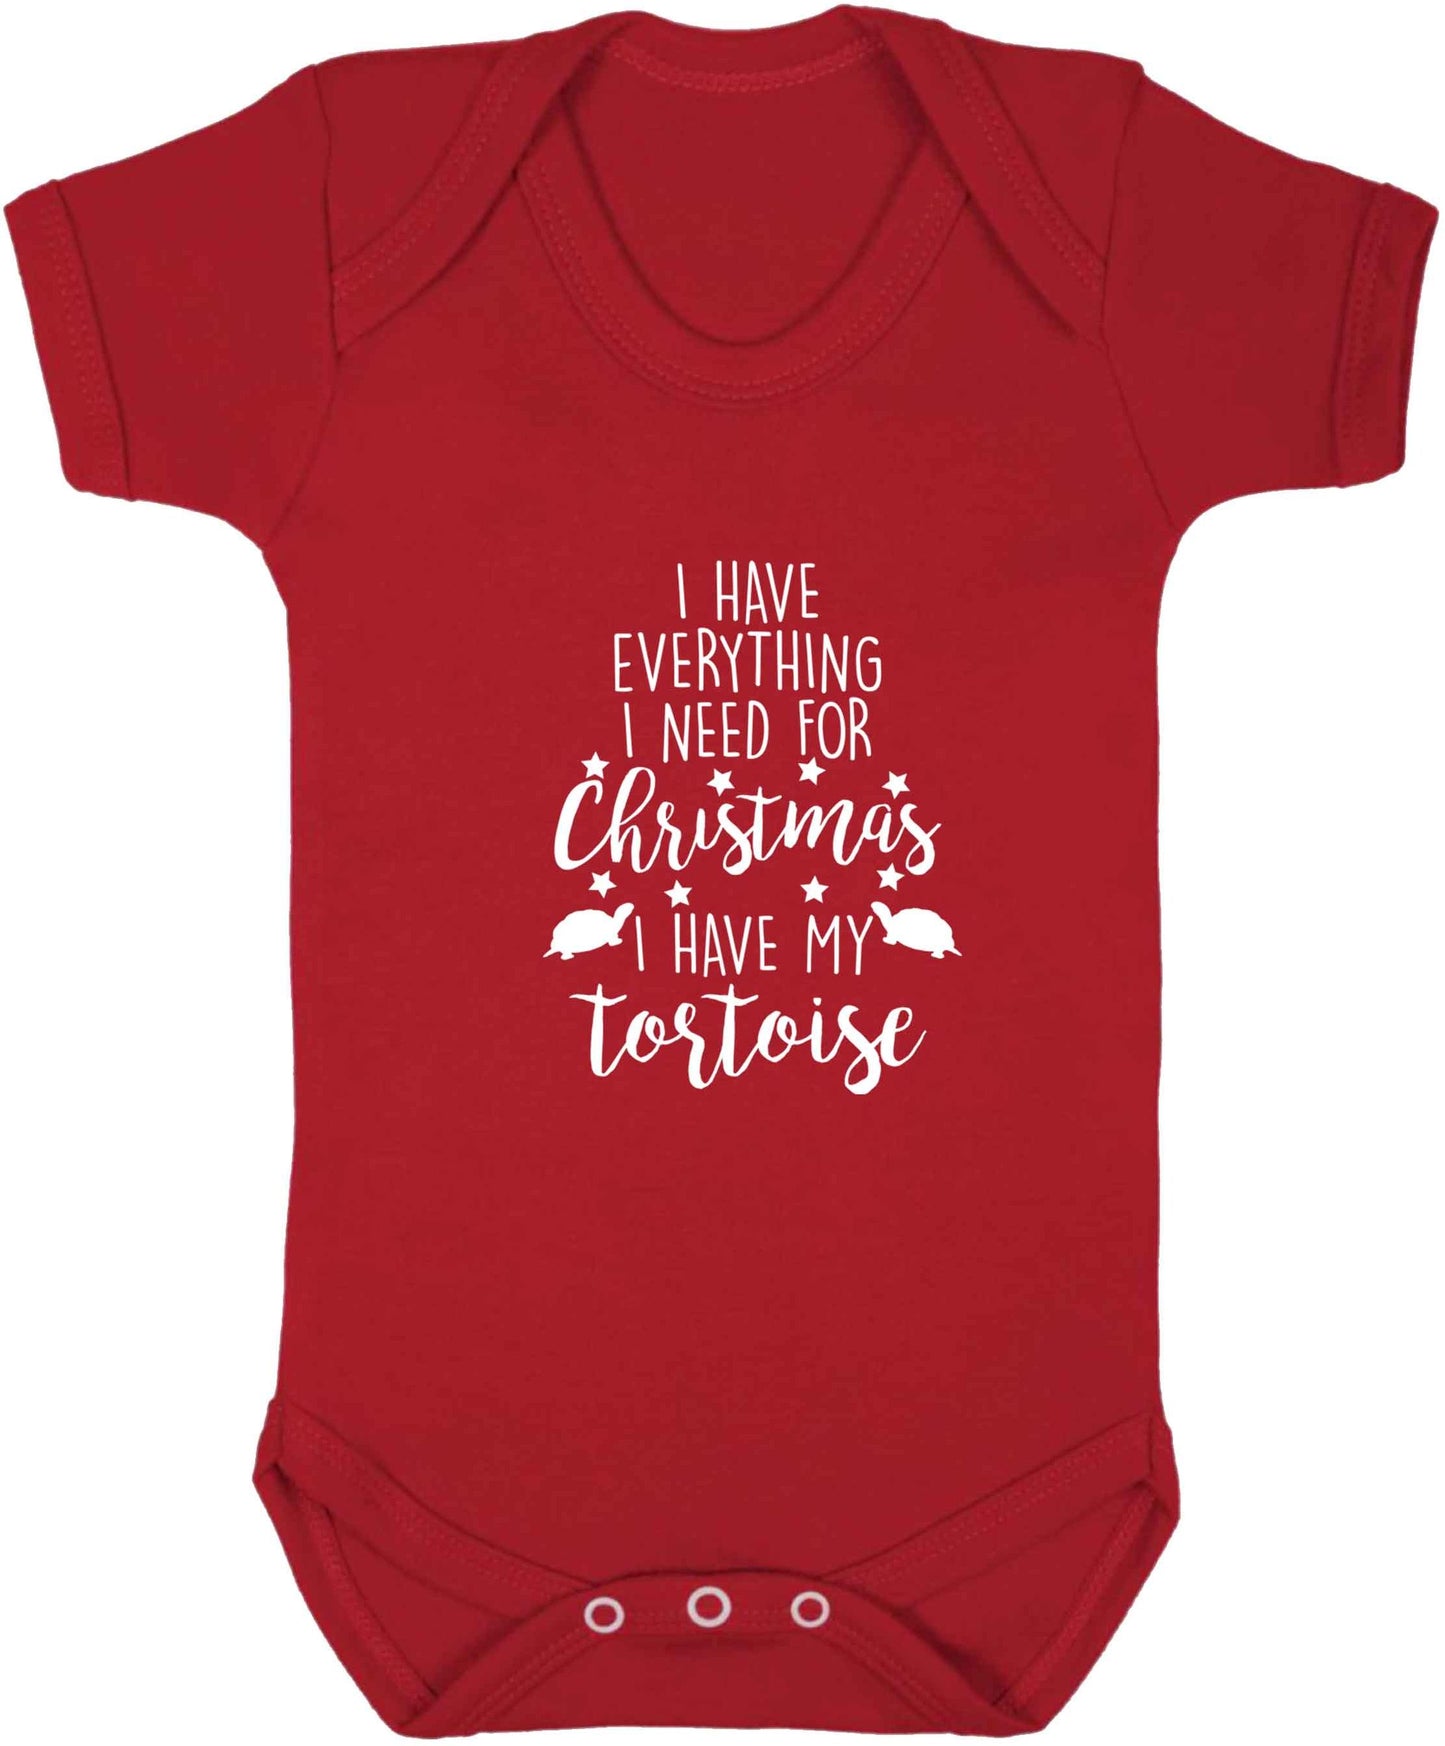 I have everything I need for Christmas I have my tortoise baby vest red 18-24 months